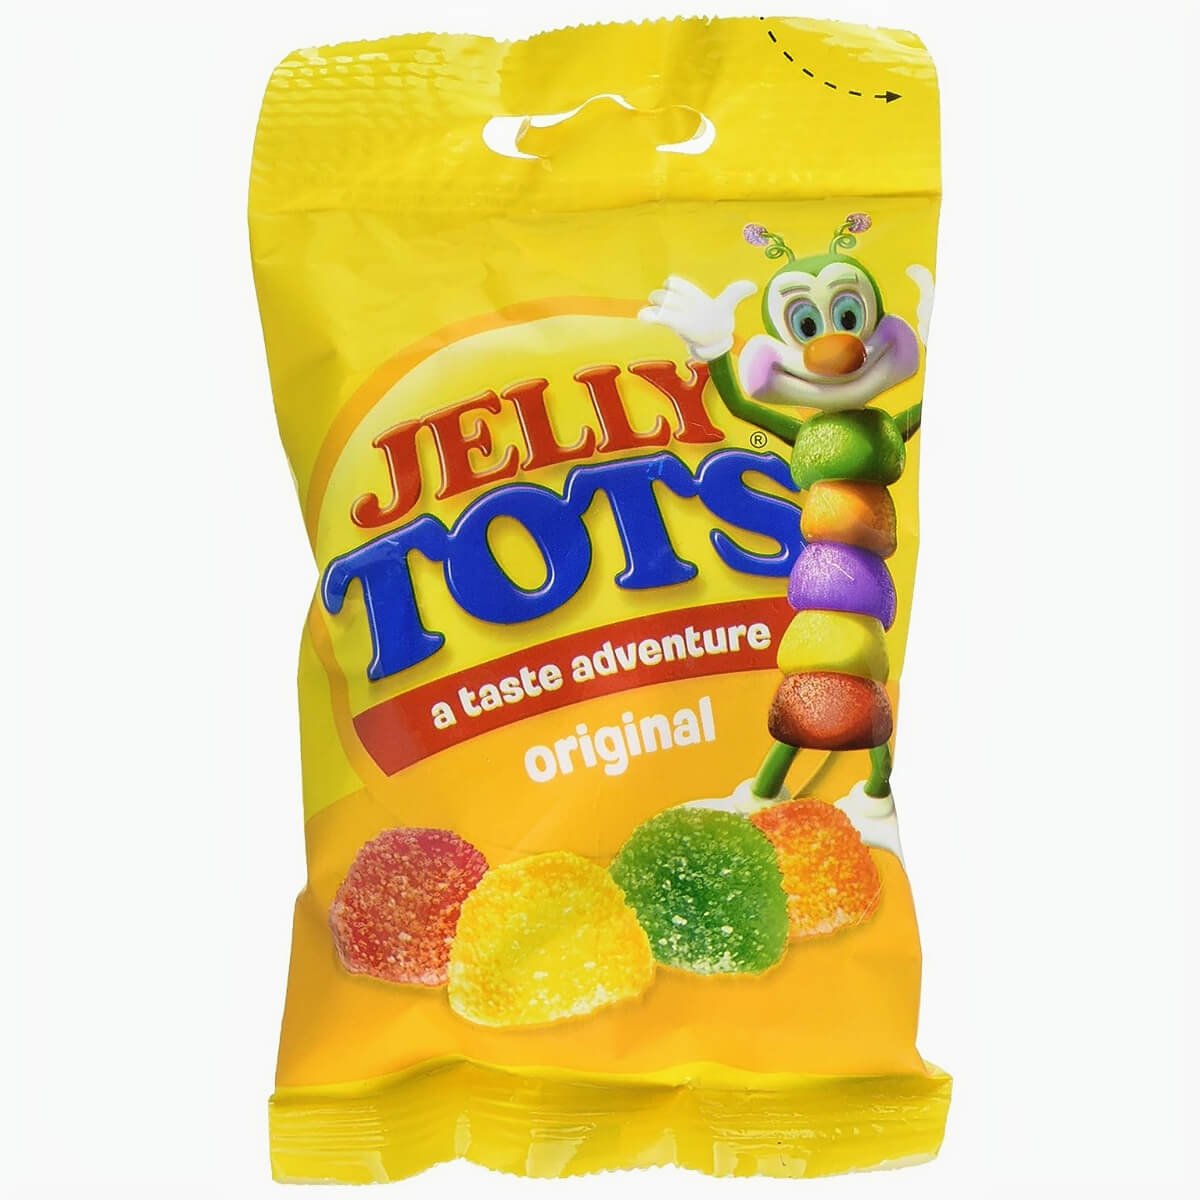 Share bag of Jelly Tots with yellow packaging (2010)